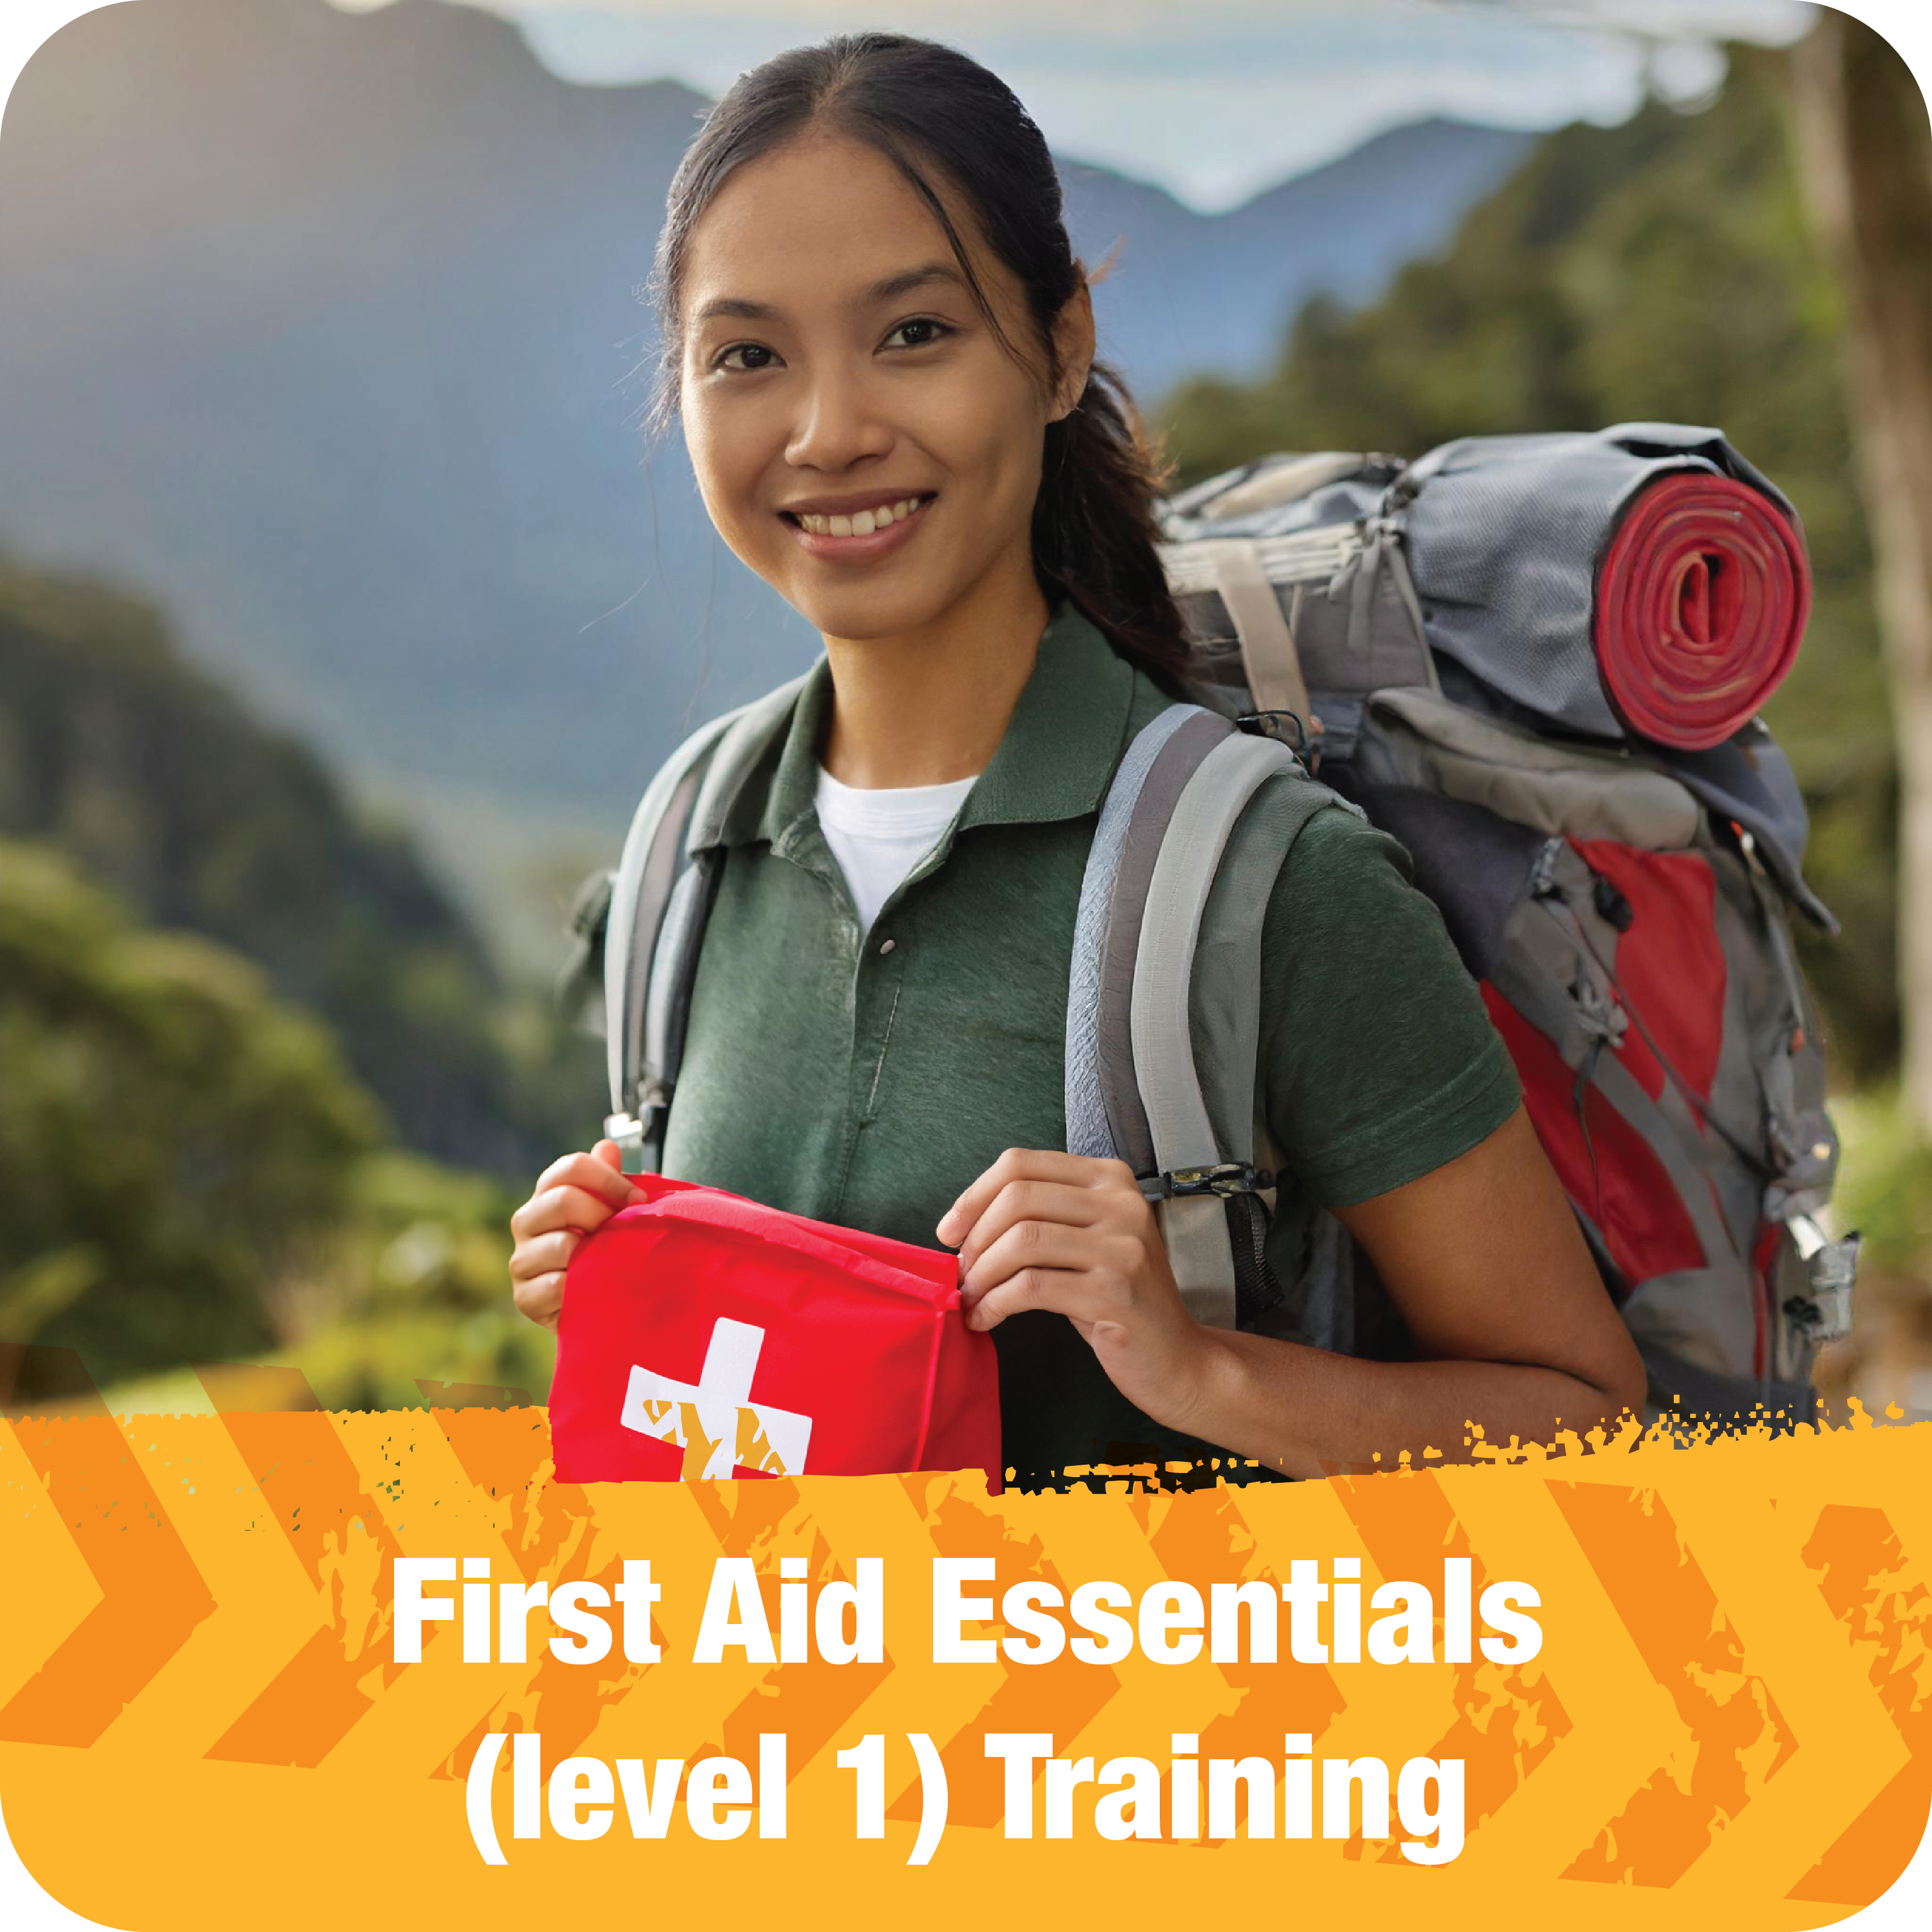 First Aid Essentials (level 1) Training The First Aid Essentials Training course is designed for low-risk workplaces and individuals who want to gain fundamental skills, ranging from minor injuries to being able to recognise and treat life-threatening eme